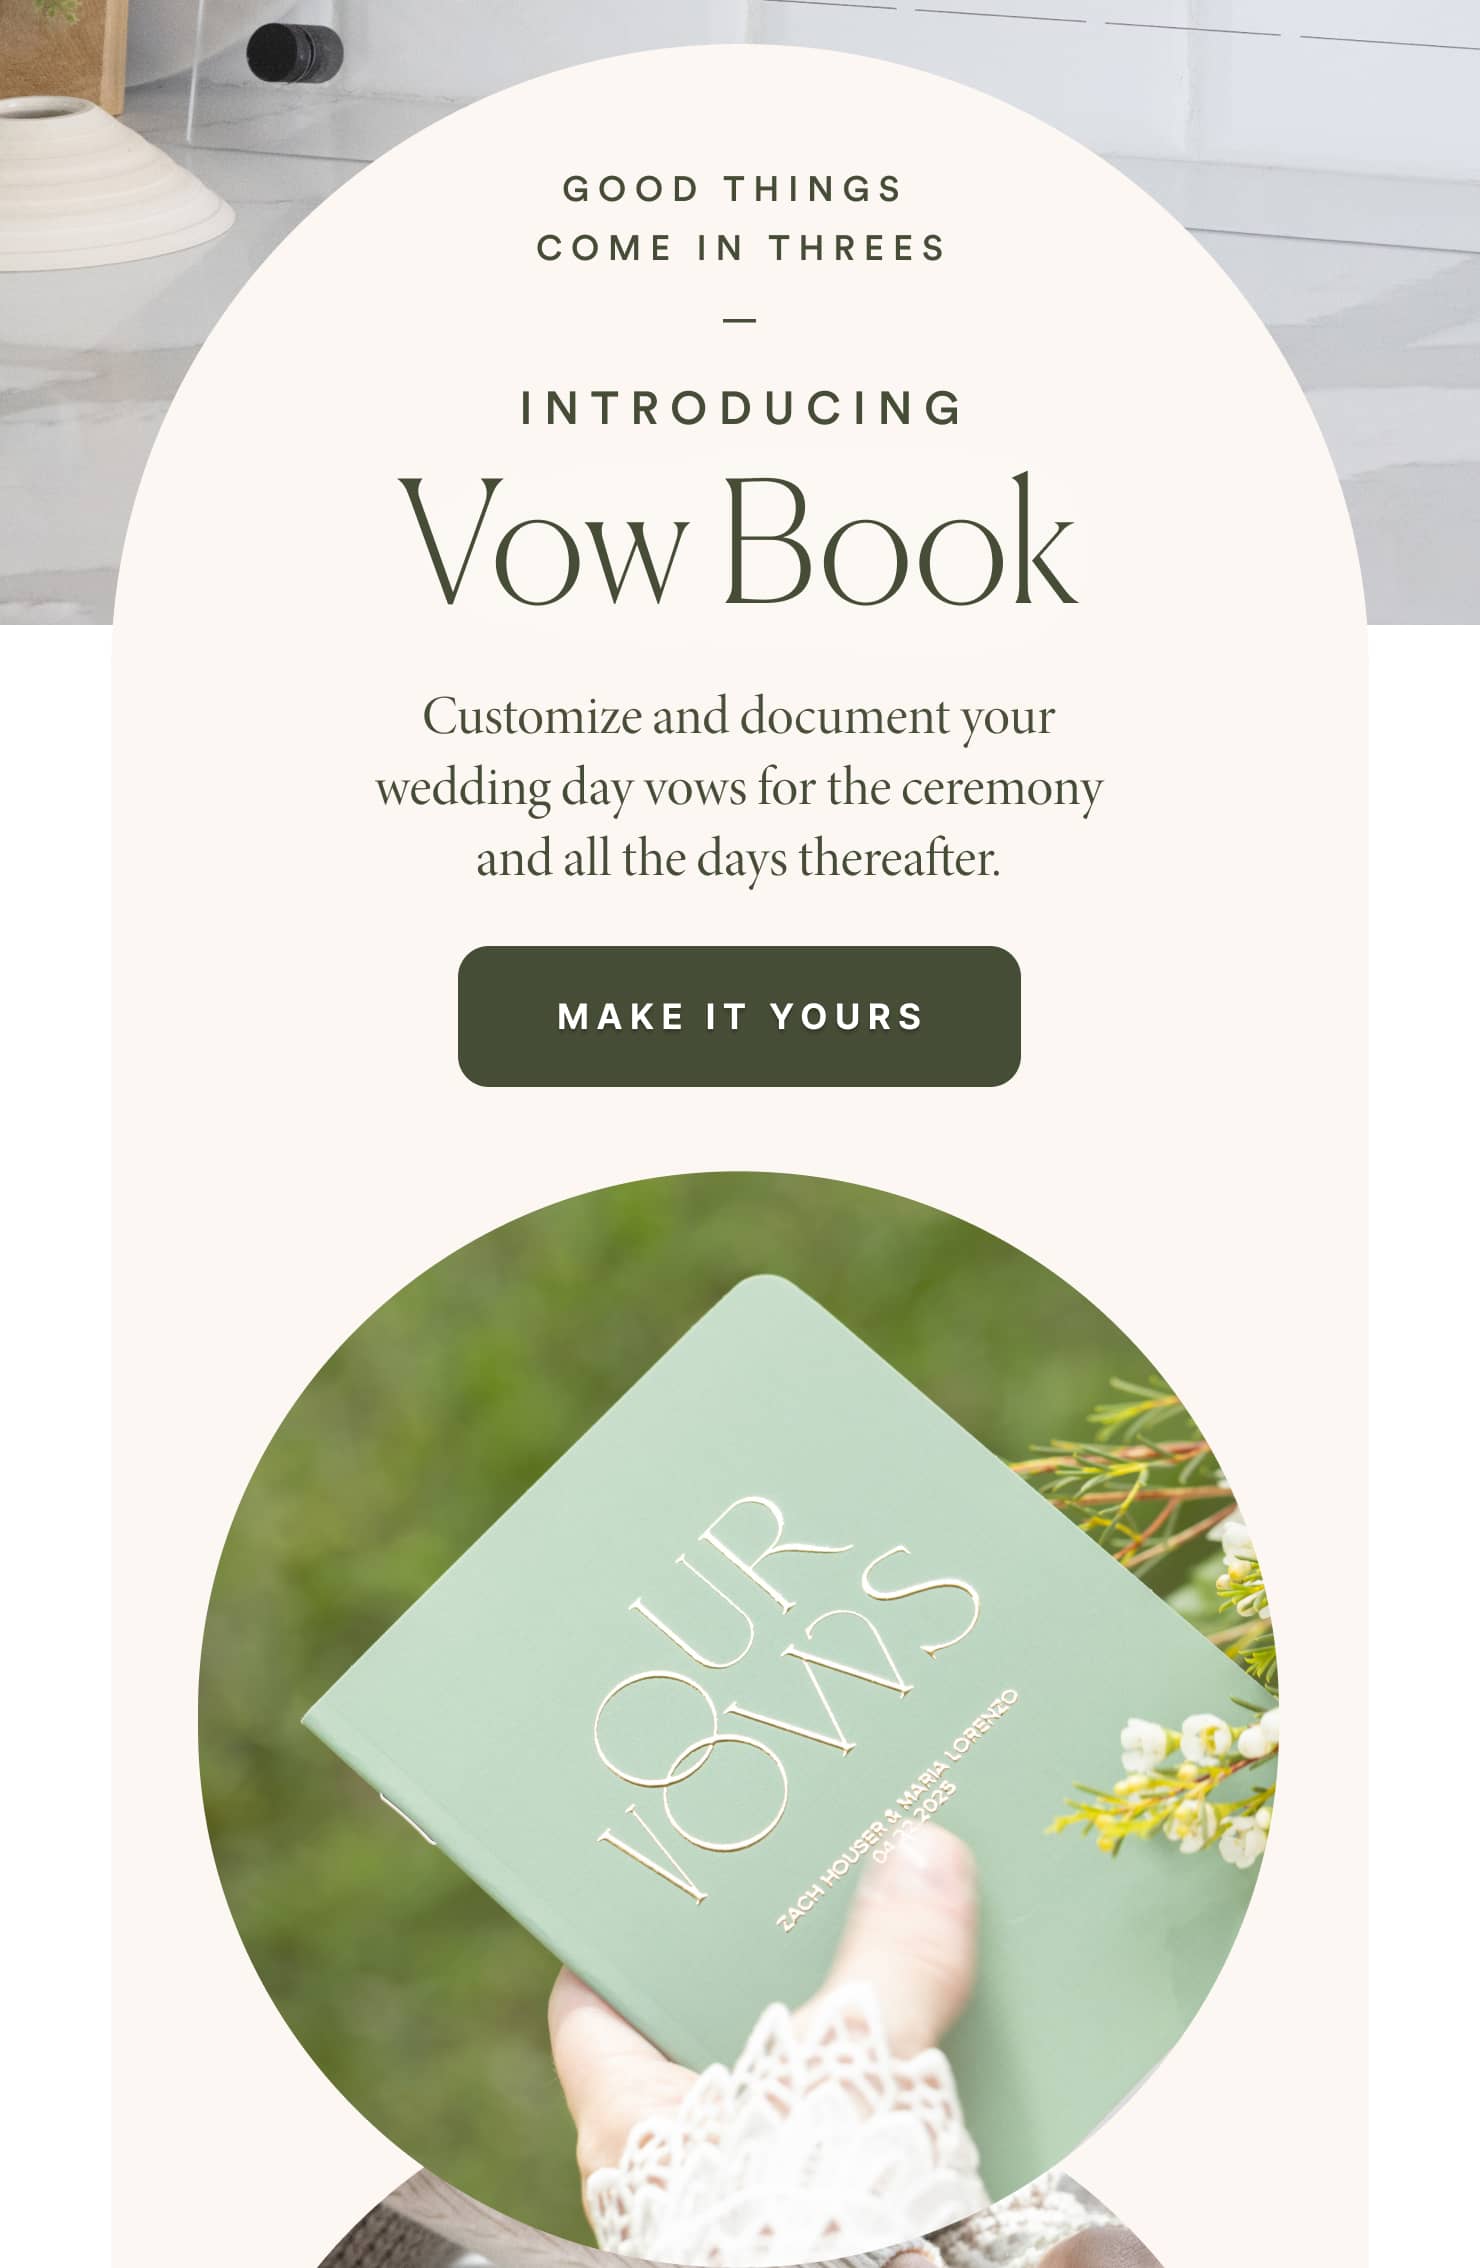 Good things come in threes | Also introducing... | Vow Book | Customize and document your wedding day vows for the ceremony and all the days thereafter. | Make it yours  GOOD THINGS COME IN THREES INTRODUCING Vow Book Customize and document your wedding day vows for the ceremony and all the days thereafter. MAKE IT YOURS 